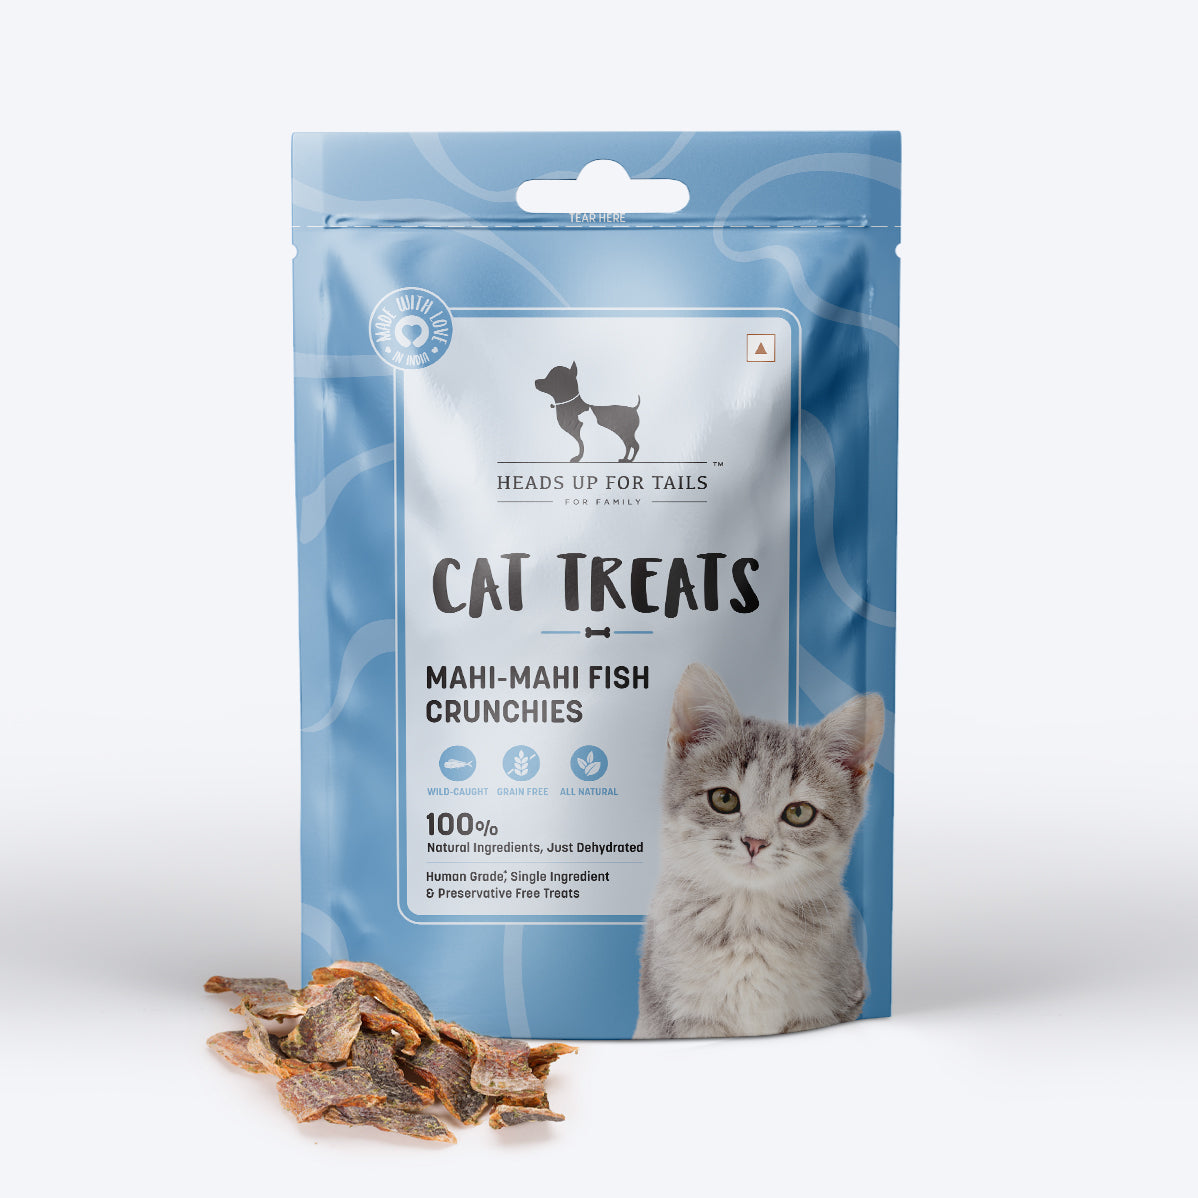 Royal Canin Fit 32 Dry Food & Mahi Mahi Fish Treats for Adult Cats - Heads Up For Tails